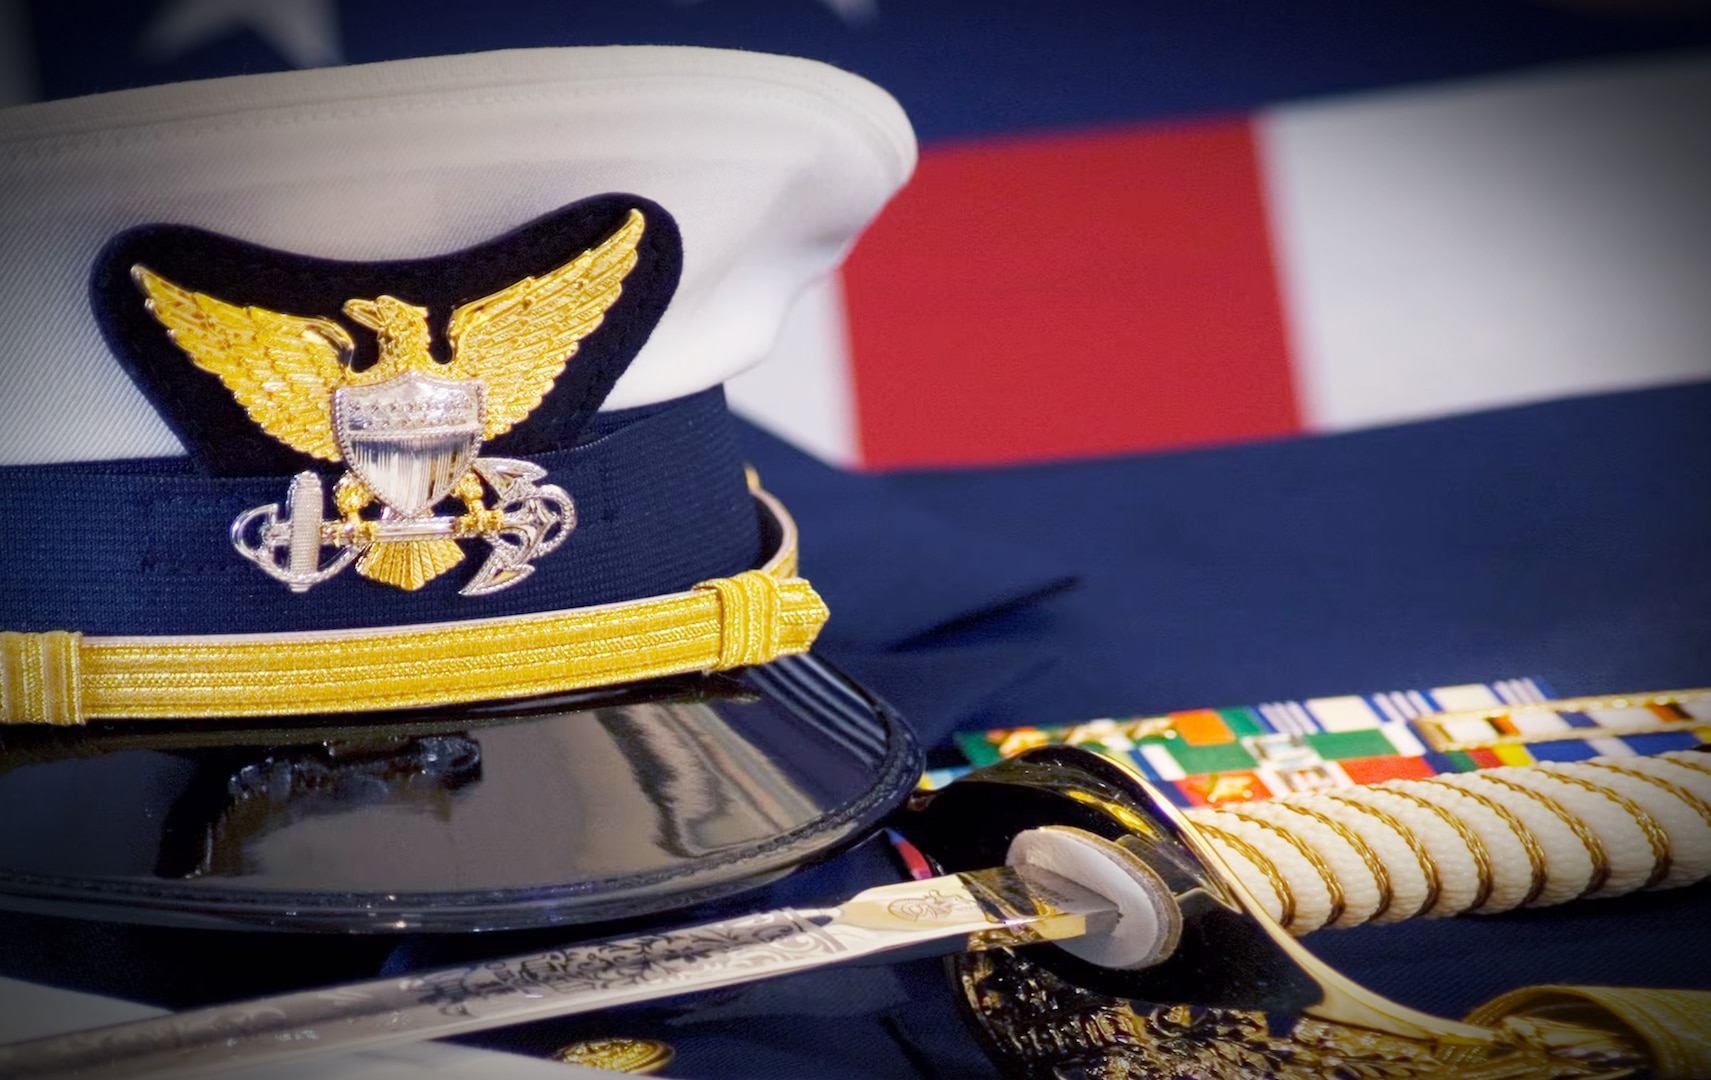 A Coast Guard Officer's hat, sword, gloves and ribbons are displayed together with the American Flag. (U.S. Coast Guard photo)